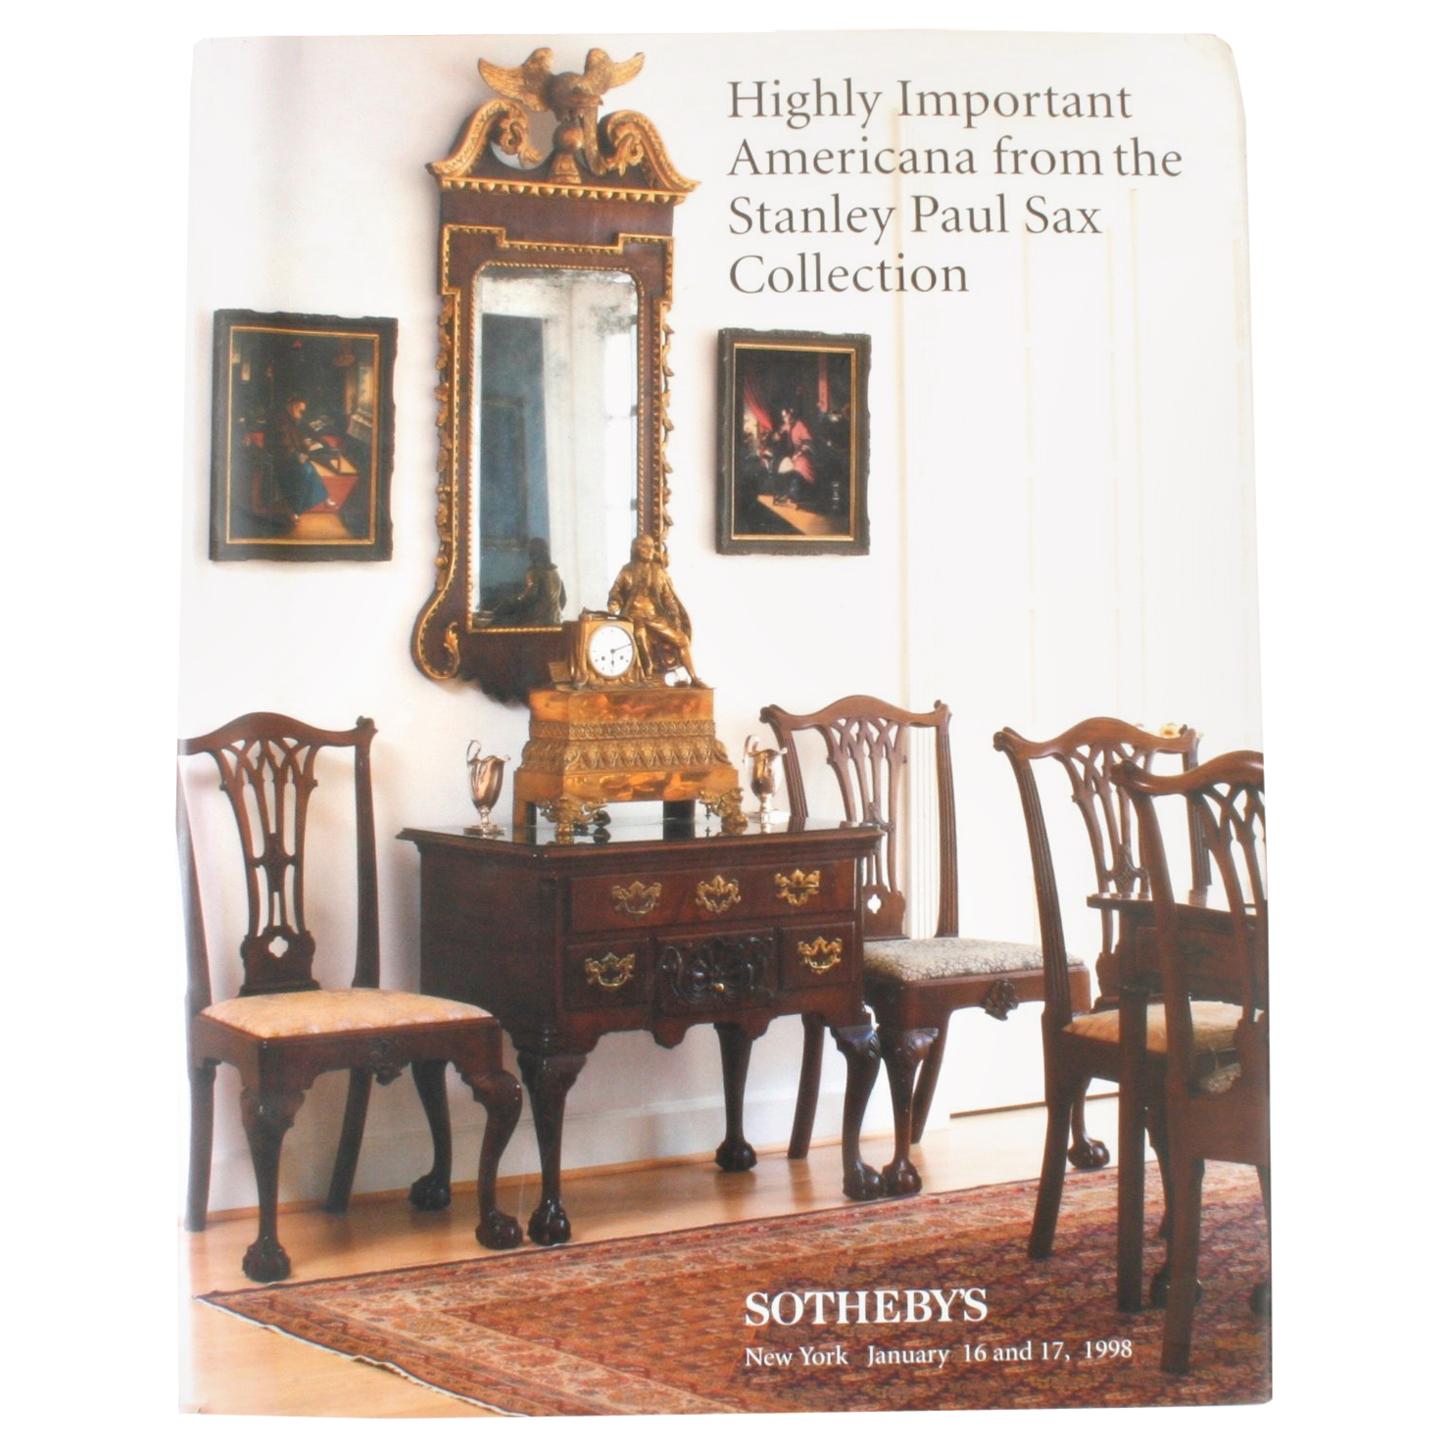 Sotheby's; Highly Important Americana from the Stanley Paul Sax Collection